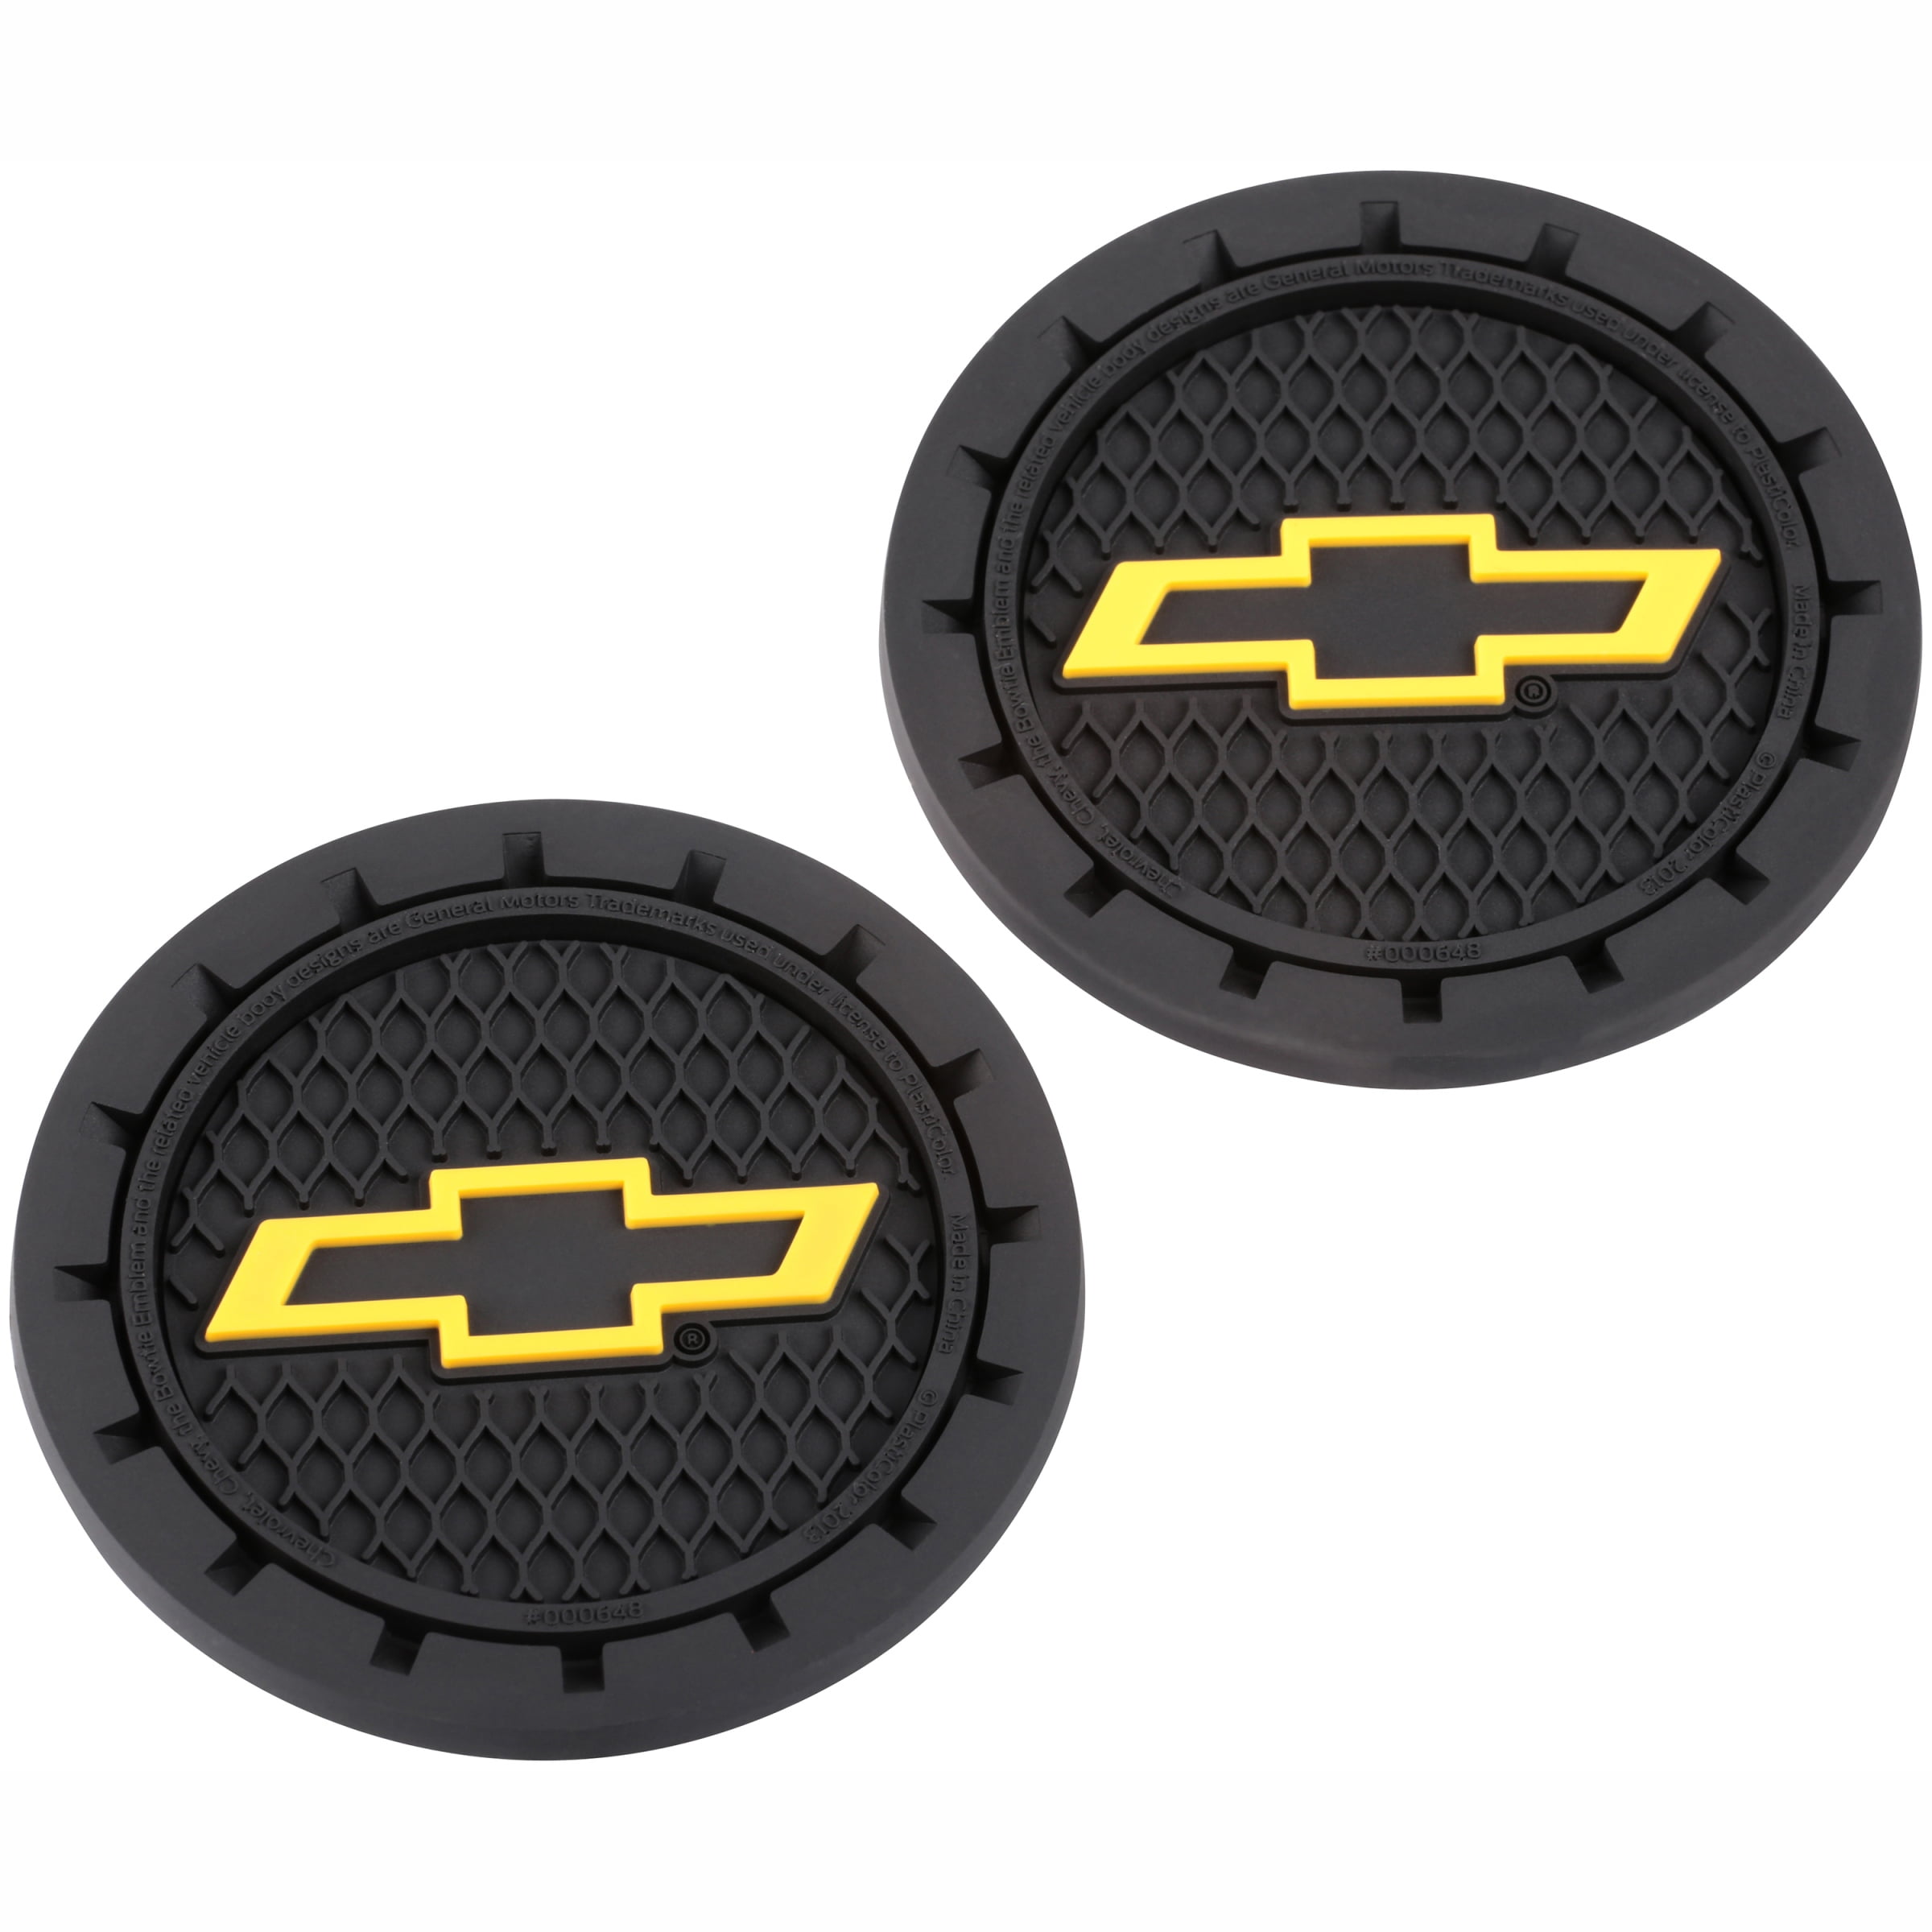 Baseball Car Coasters For Vehicle Cup Holders Set Of 2 